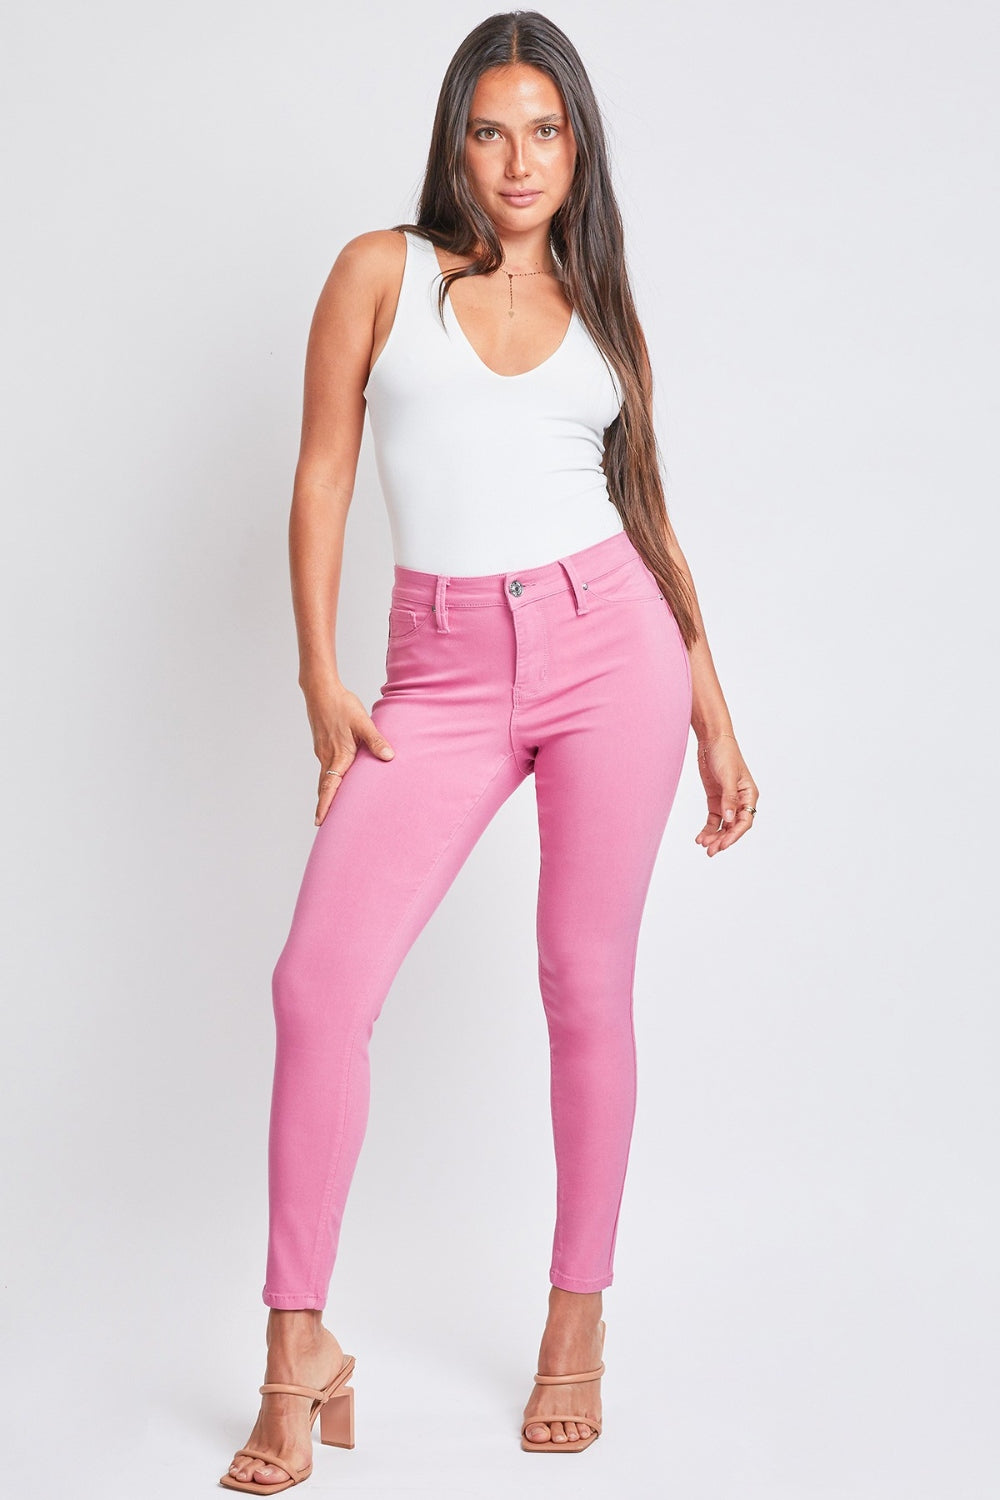 YMI Jeanswear Hyperstretch Mid-Rise Skinny Pants-Trendsi-Flami-Flamingo-S-[option4]-[option5]-[option6]-[option7]-[option8]-Shop-Boutique-Clothing-for-Women-Online